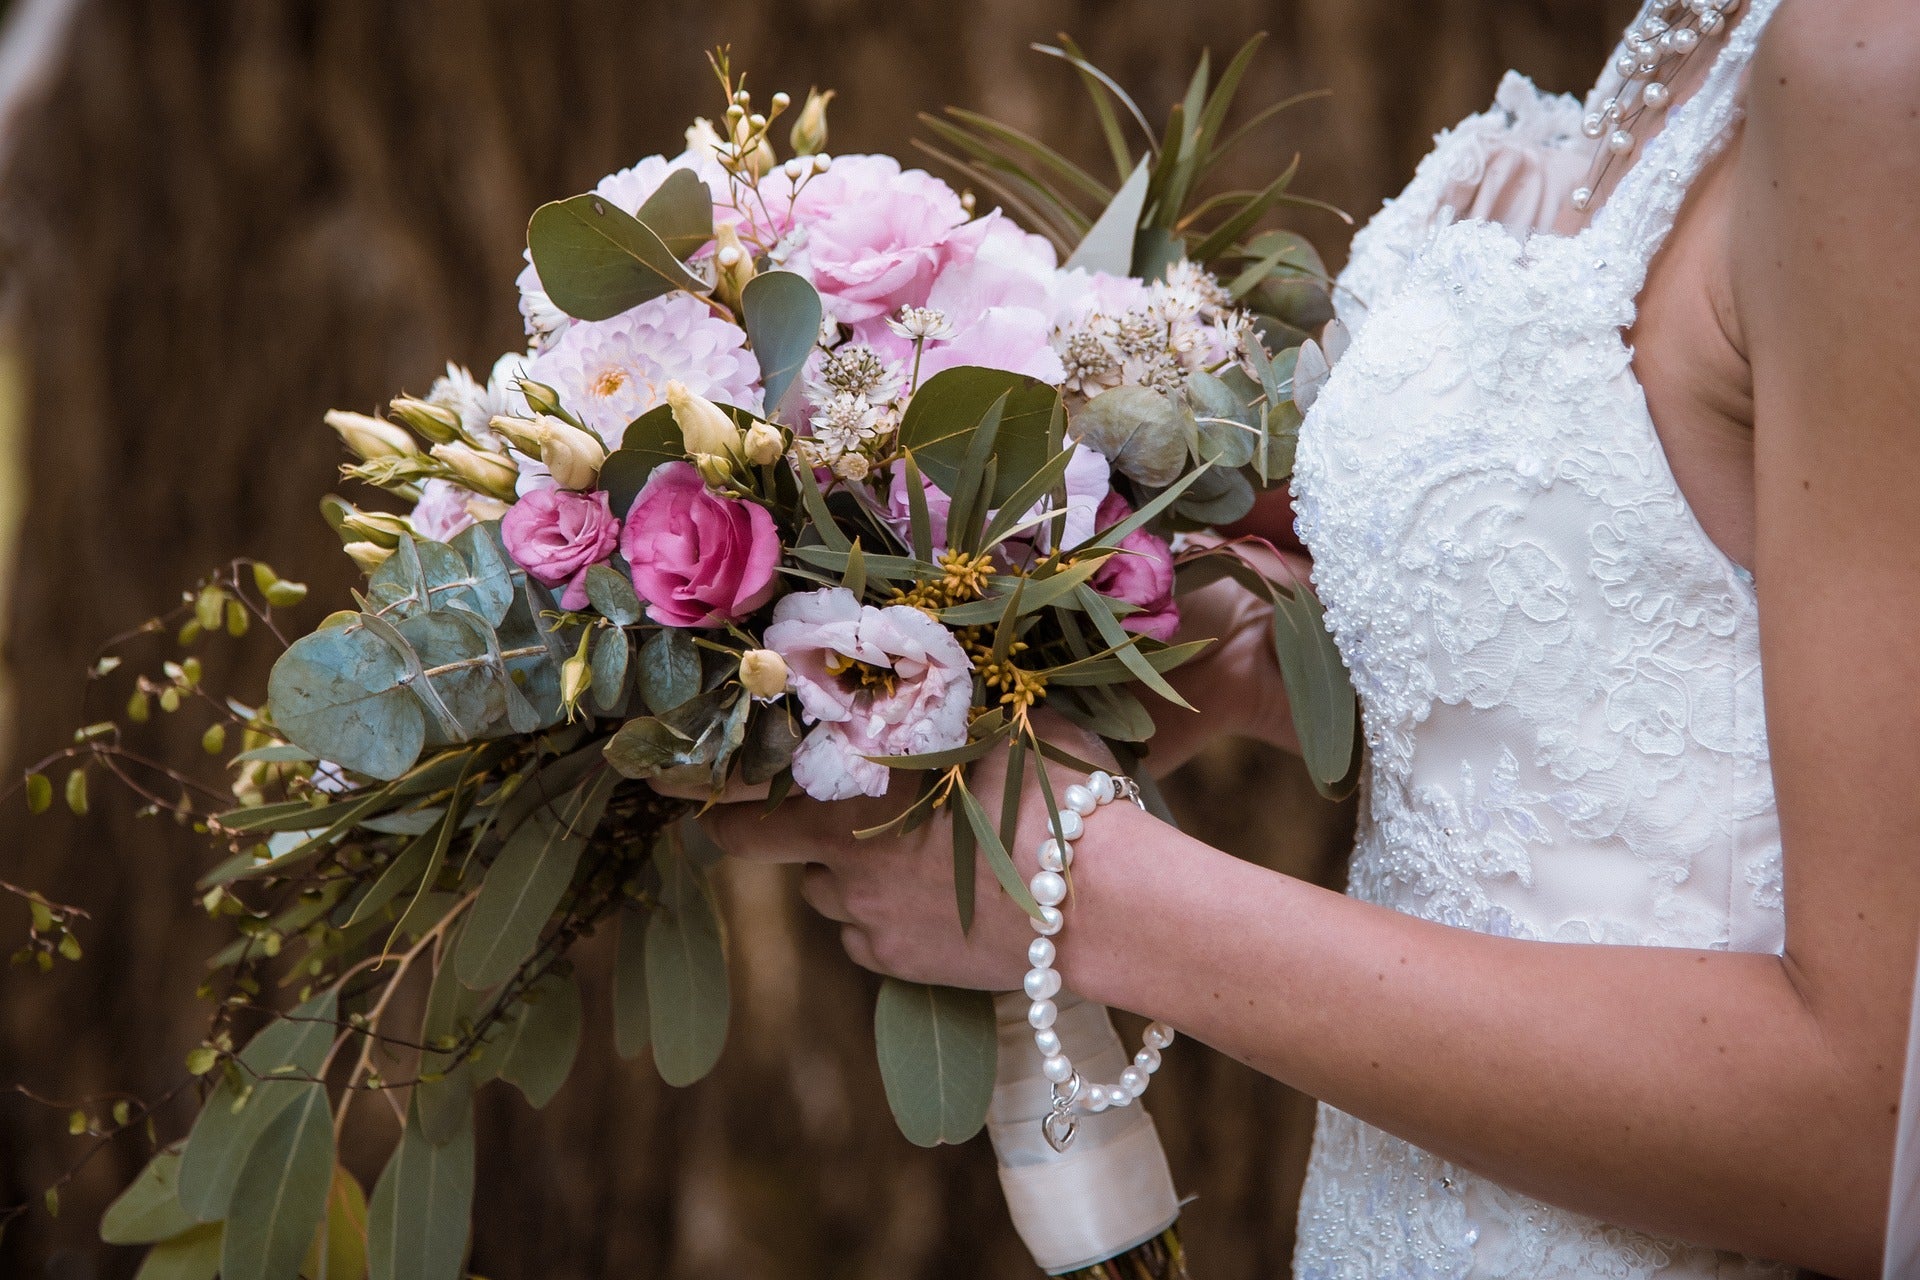 How To Choose The Perfect Bouquet To Match Your Wedding Dress